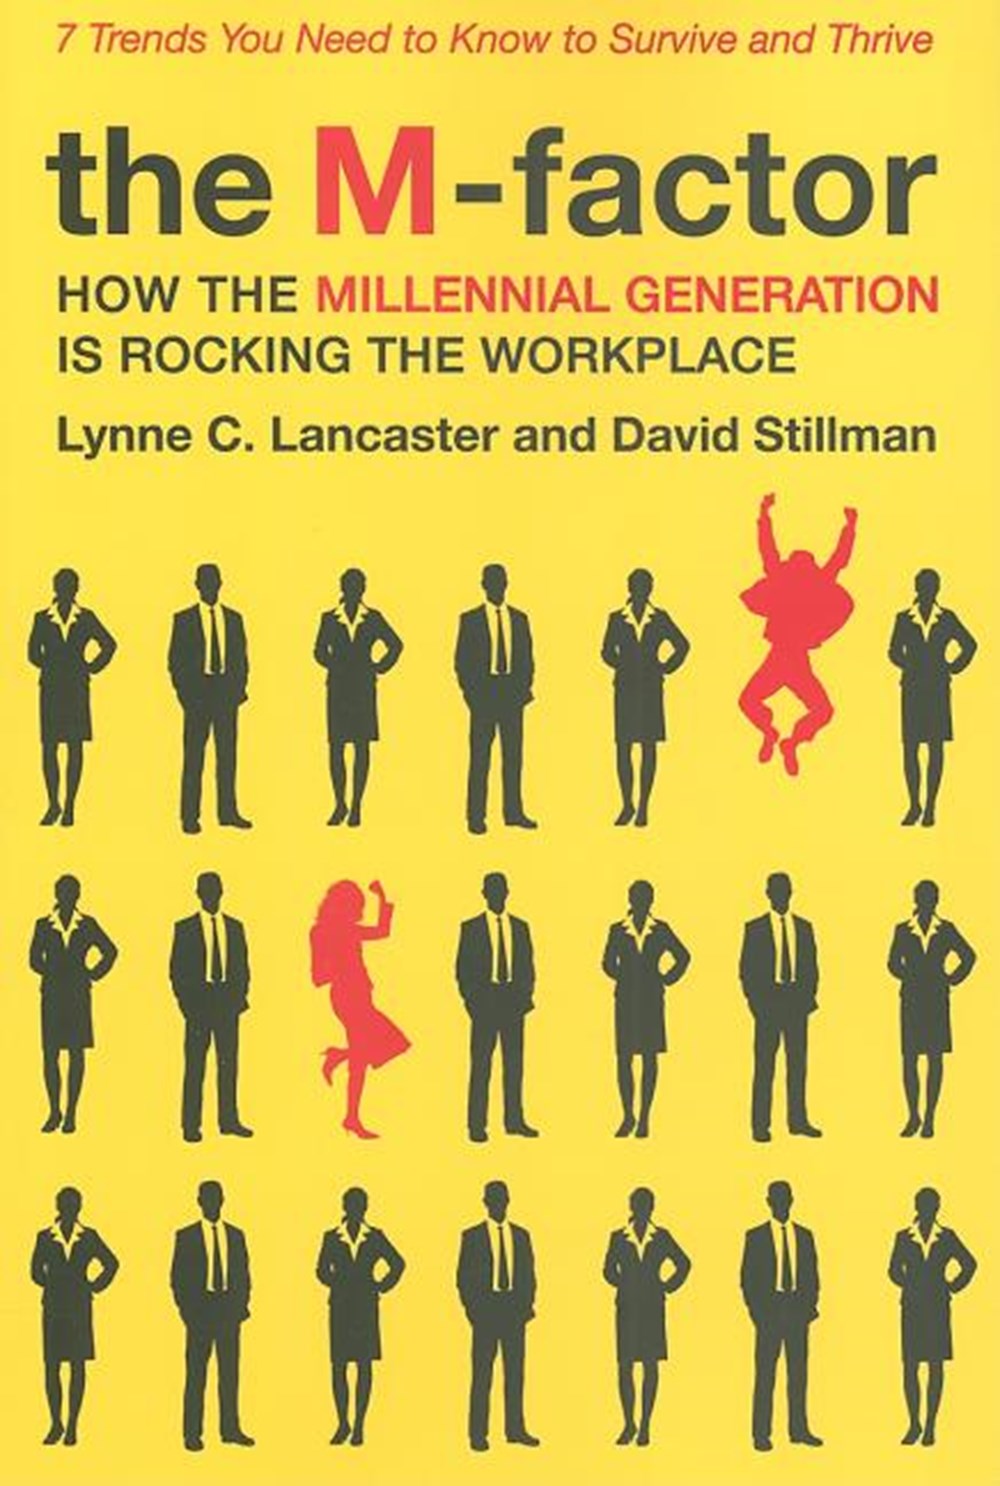 M-Factor: How the Millennial Generation Is Rocking the Workplace